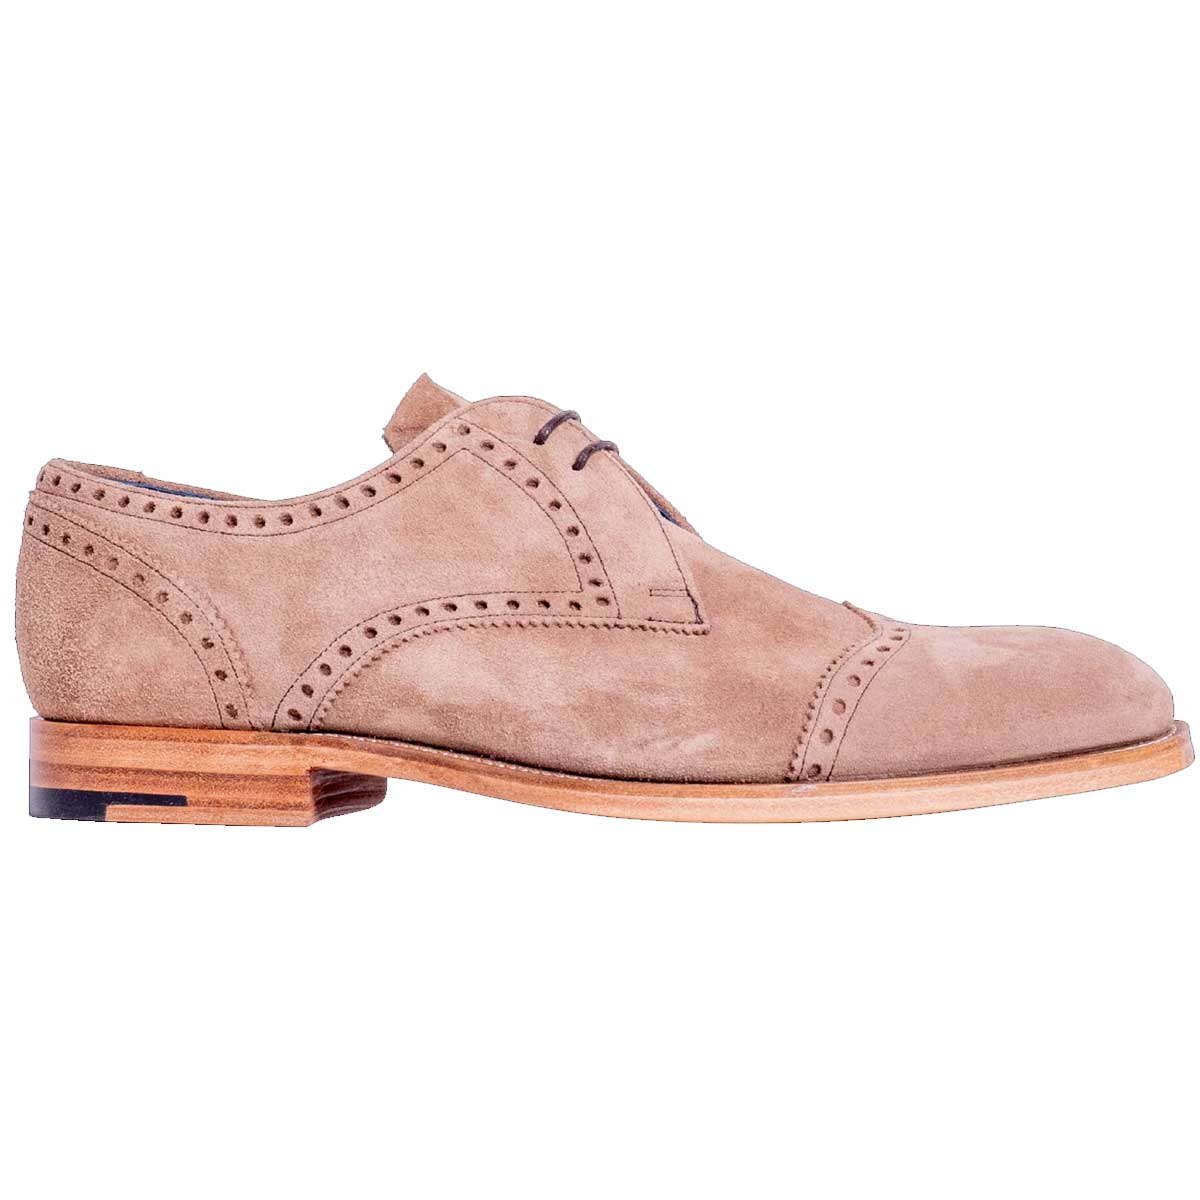 40 % OFF BARKER Matlock Shoes - Mens - Palude Suede - Size: UK 9